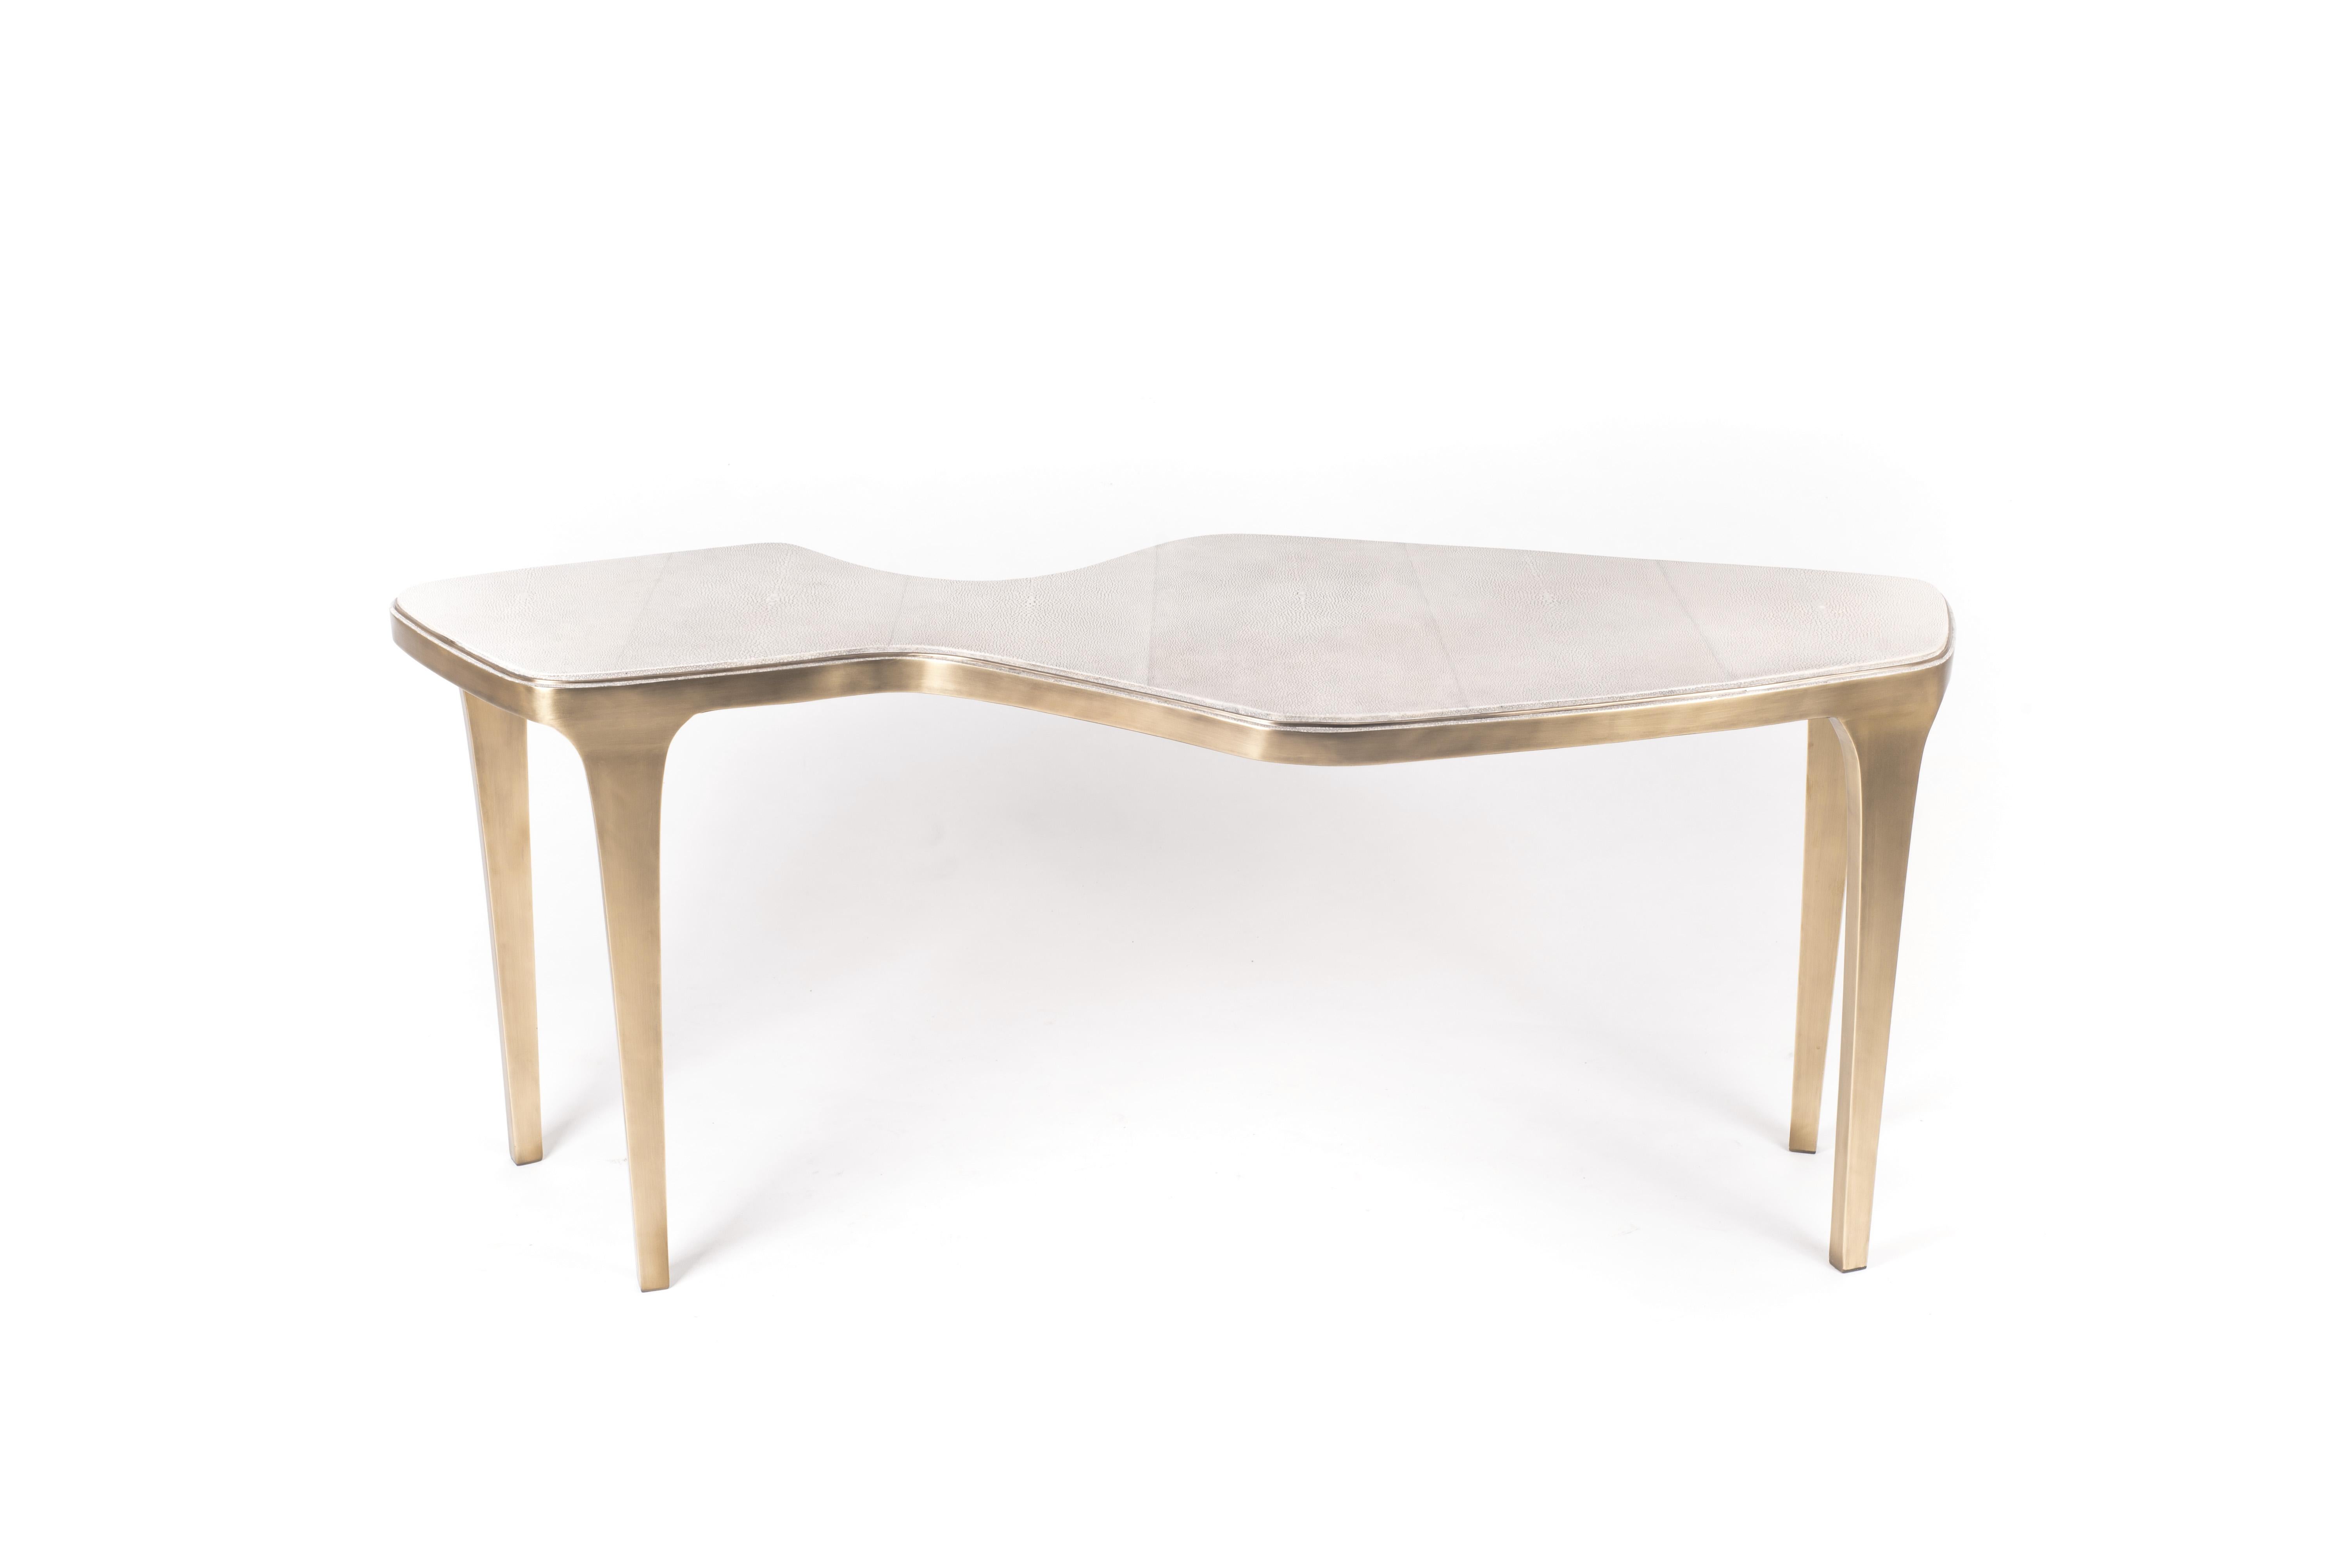 The cosmos nesting coffee table large is both Minimalist and dramatic. The top is inlaid in cream shagreen, that is hand-dyed by artisans, and completed with bronze-patina brass. The designer calls this finish 